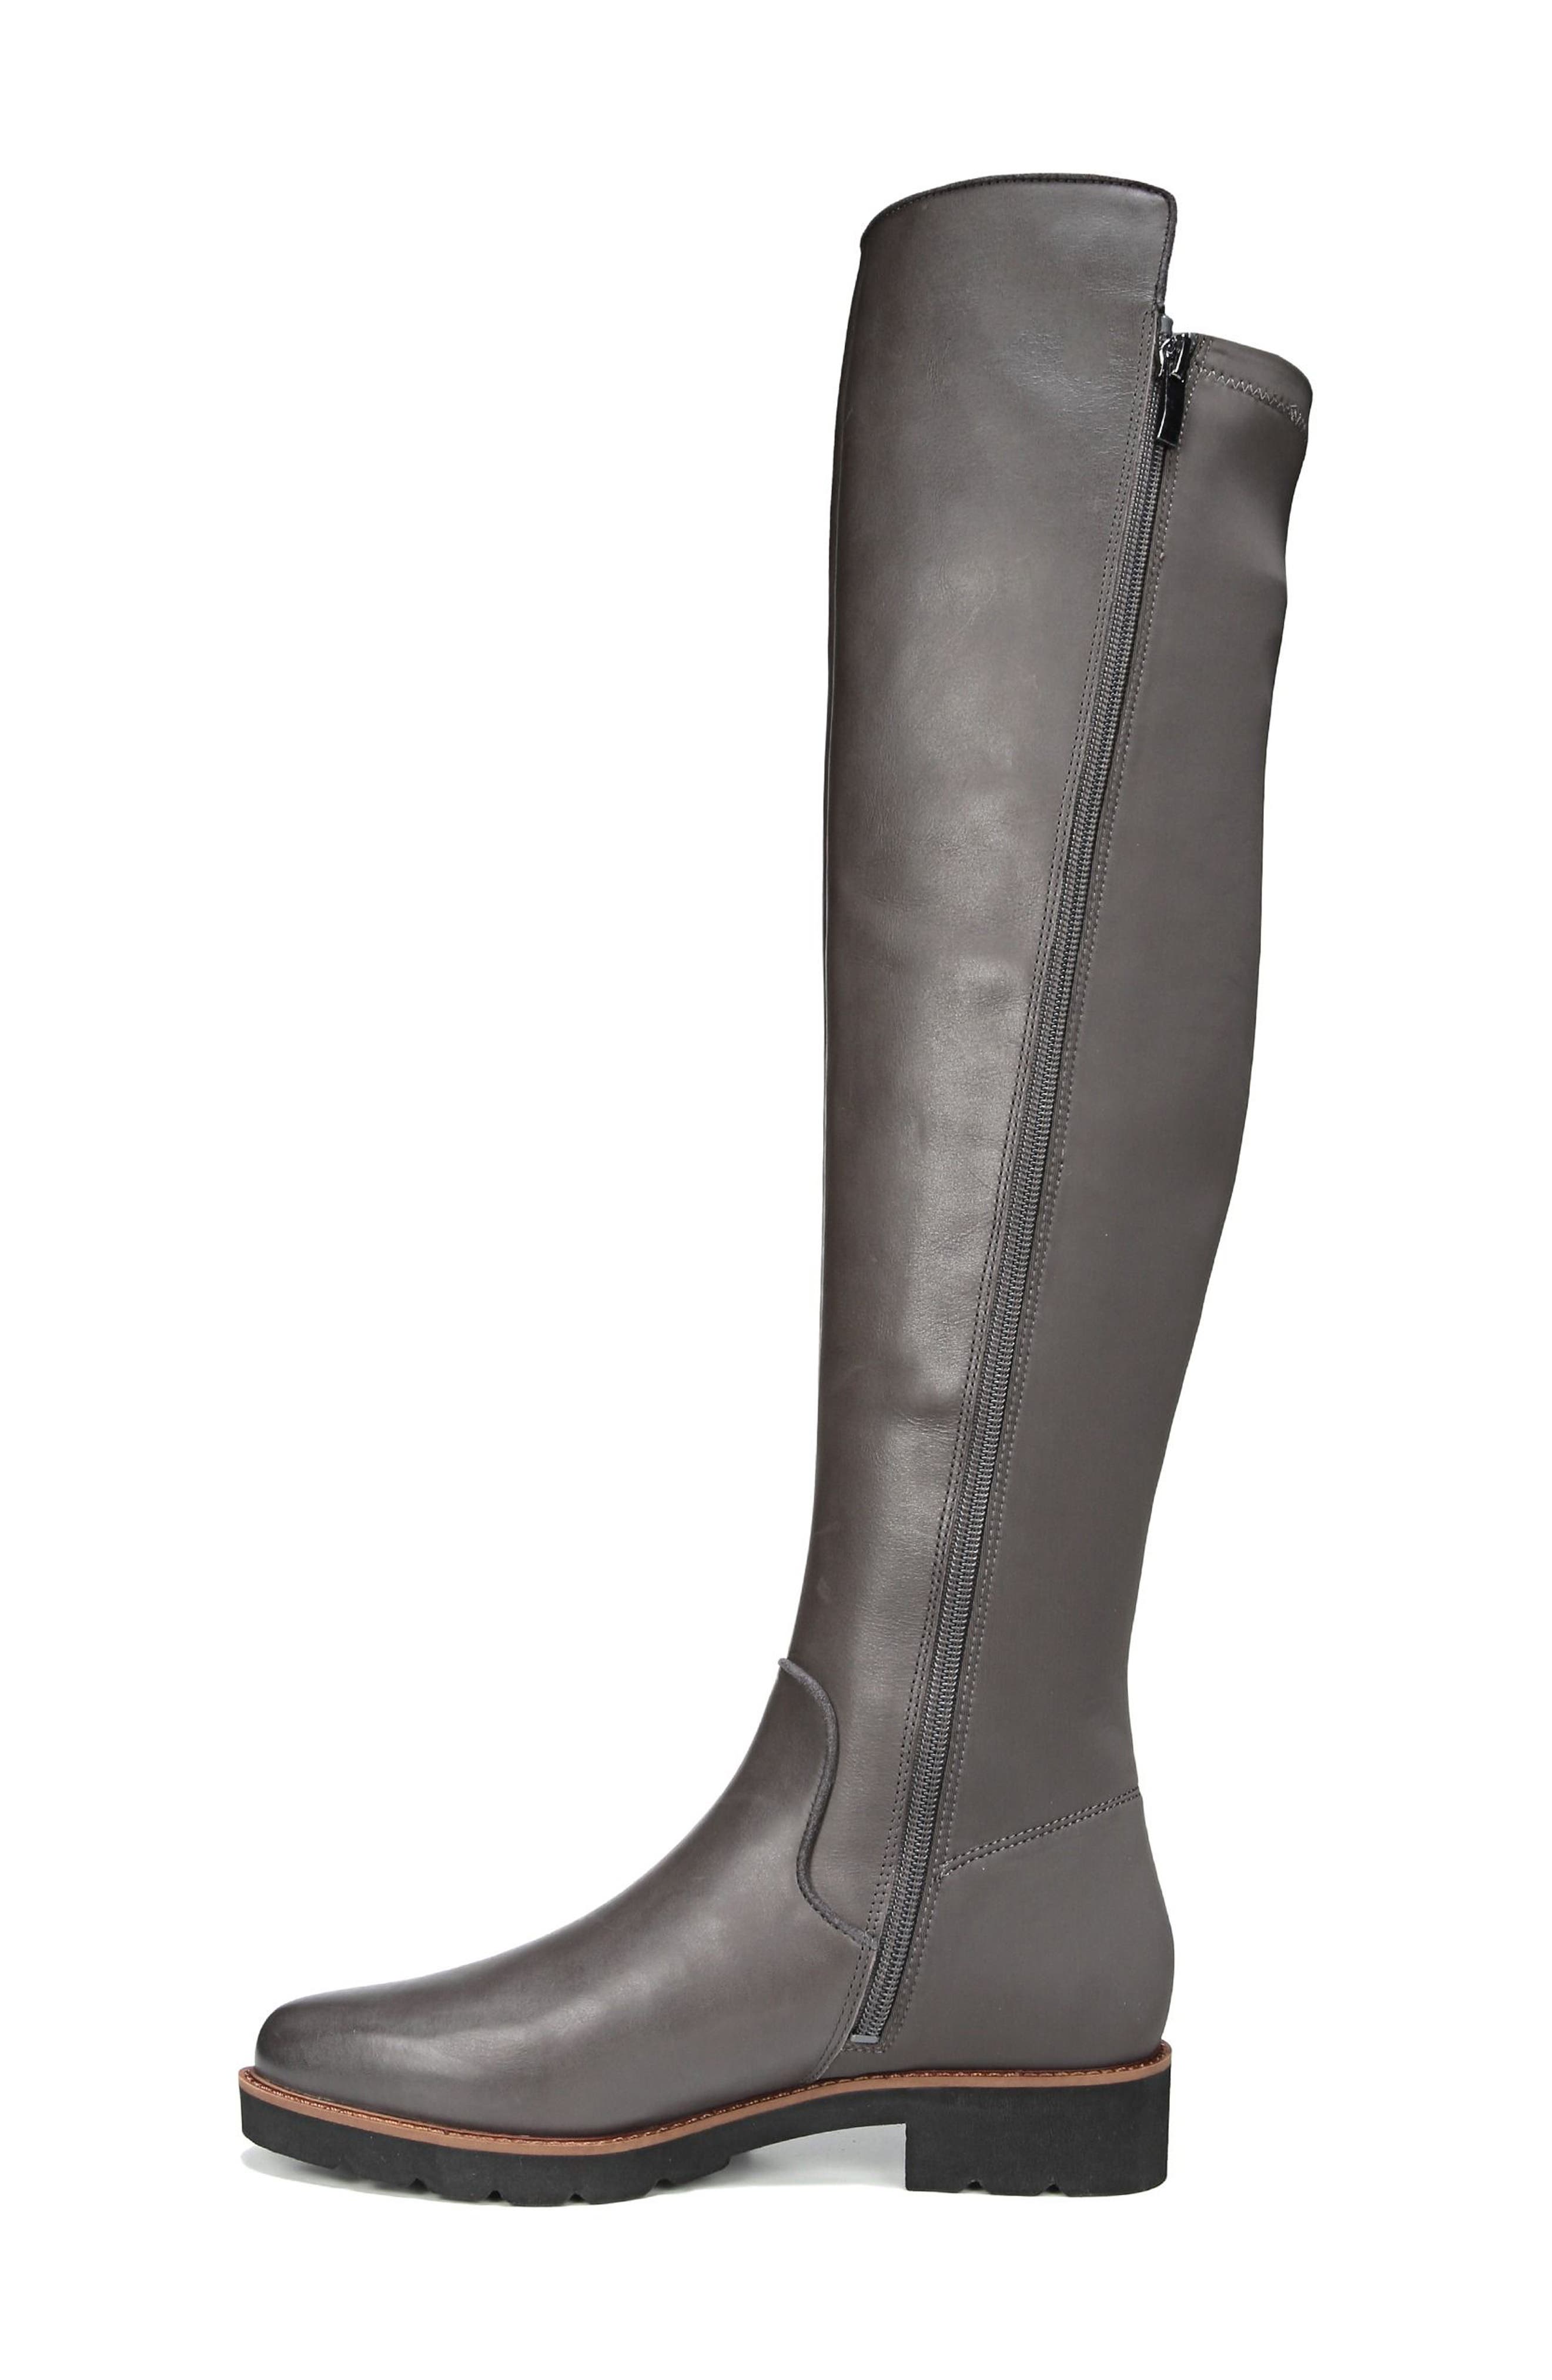 benner leather over the knee boot